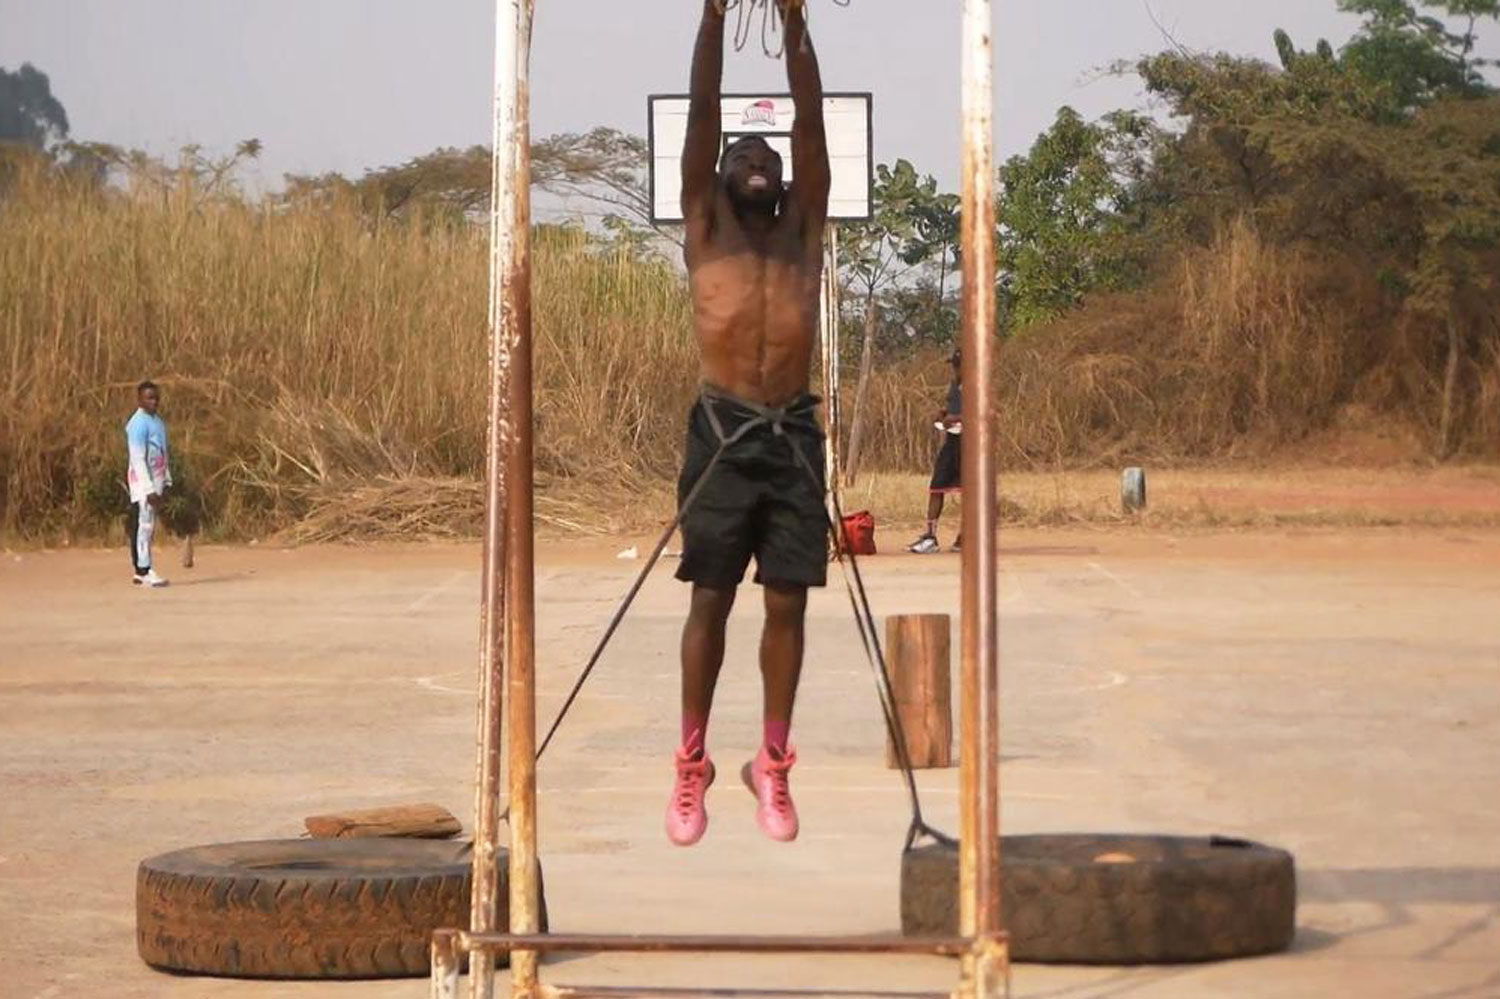 Cameroonian Man’s Incredible Fitness Routine Puts Your Workout Excuses To Shame